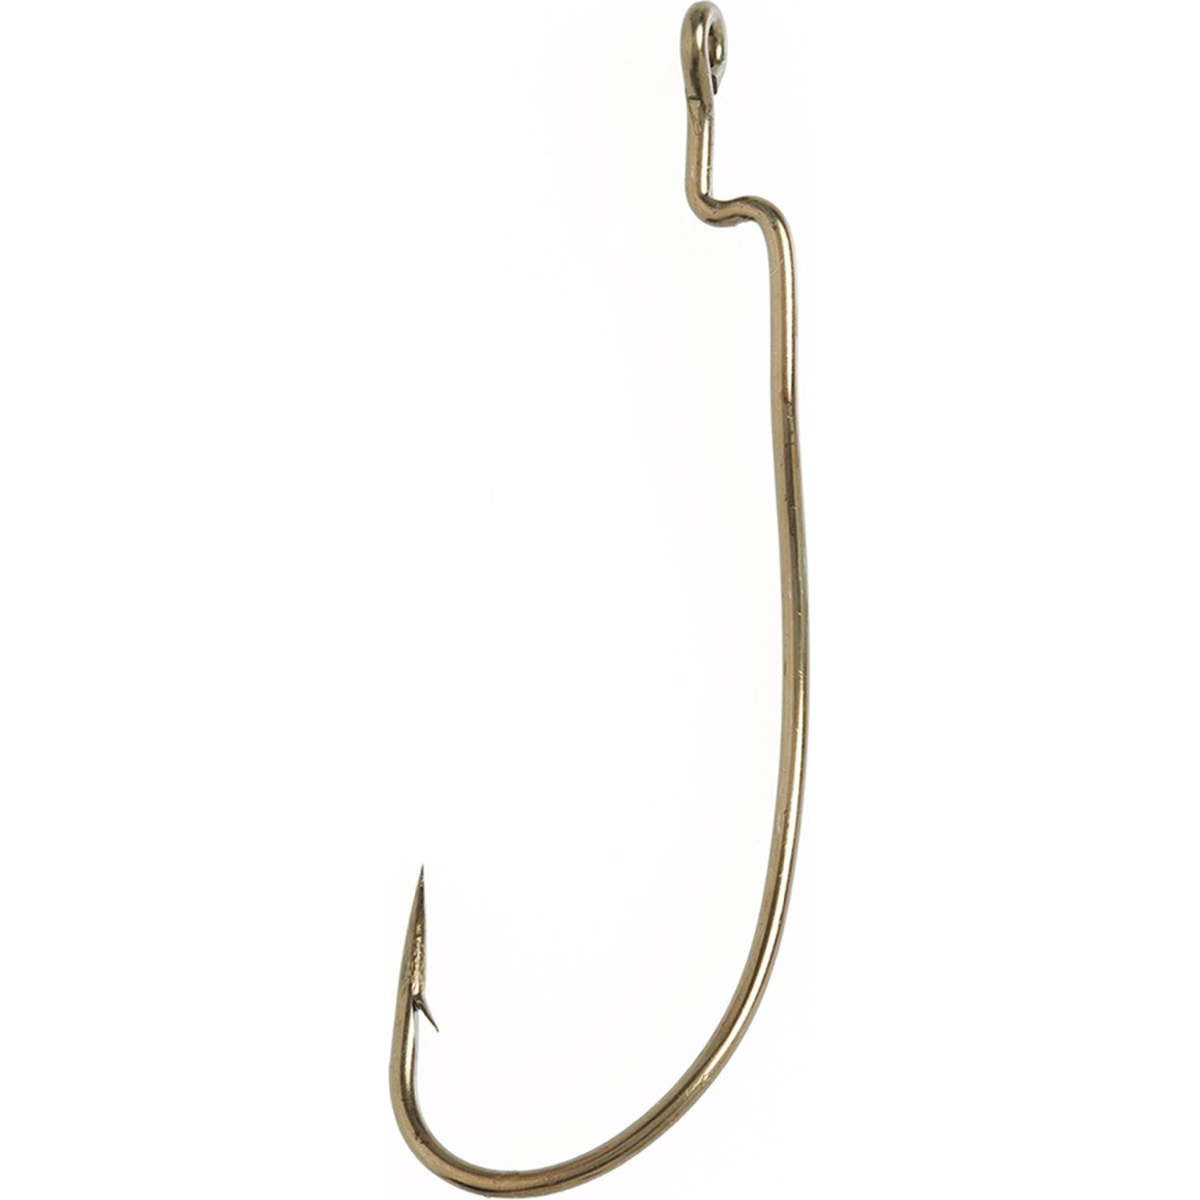 Photo of Eagle Claw Lazer Sharp Z-Bend Rotating Worm Hook for sale at United Tackle Shops.